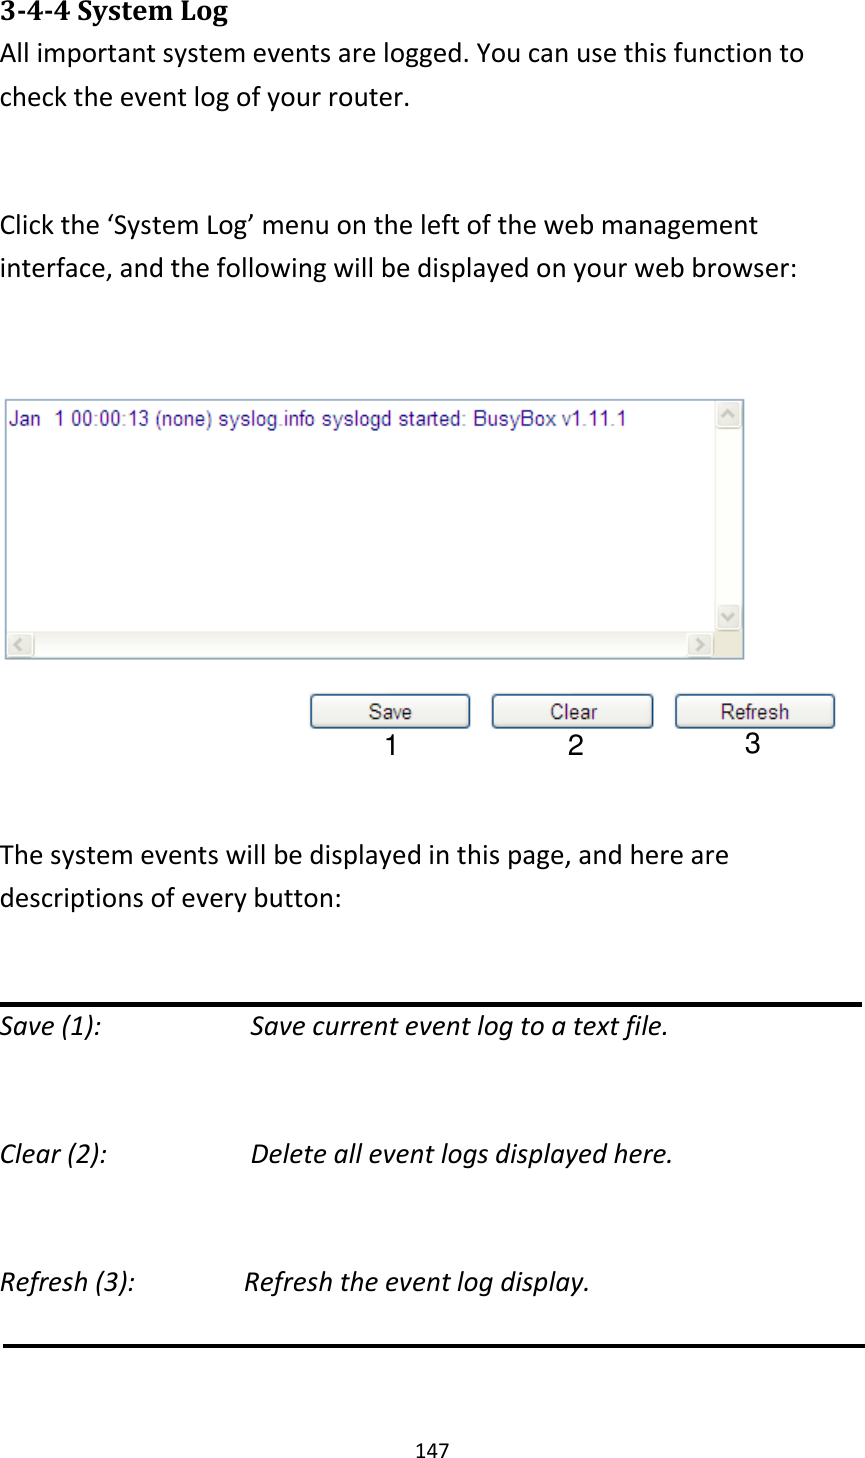 147 3-4-4 System Log All important system events are logged. You can use this function to check the event log of your router.  Click the ‘System Log’ menu on the left of the web management interface, and the following will be displayed on your web browser:    The system events will be displayed in this page, and here are descriptions of every button:  Save (1):        Save current event log to a text file.  Clear (2):        Delete all event logs displayed here.  Refresh (3):        Refresh the event log display.   1 2 3 